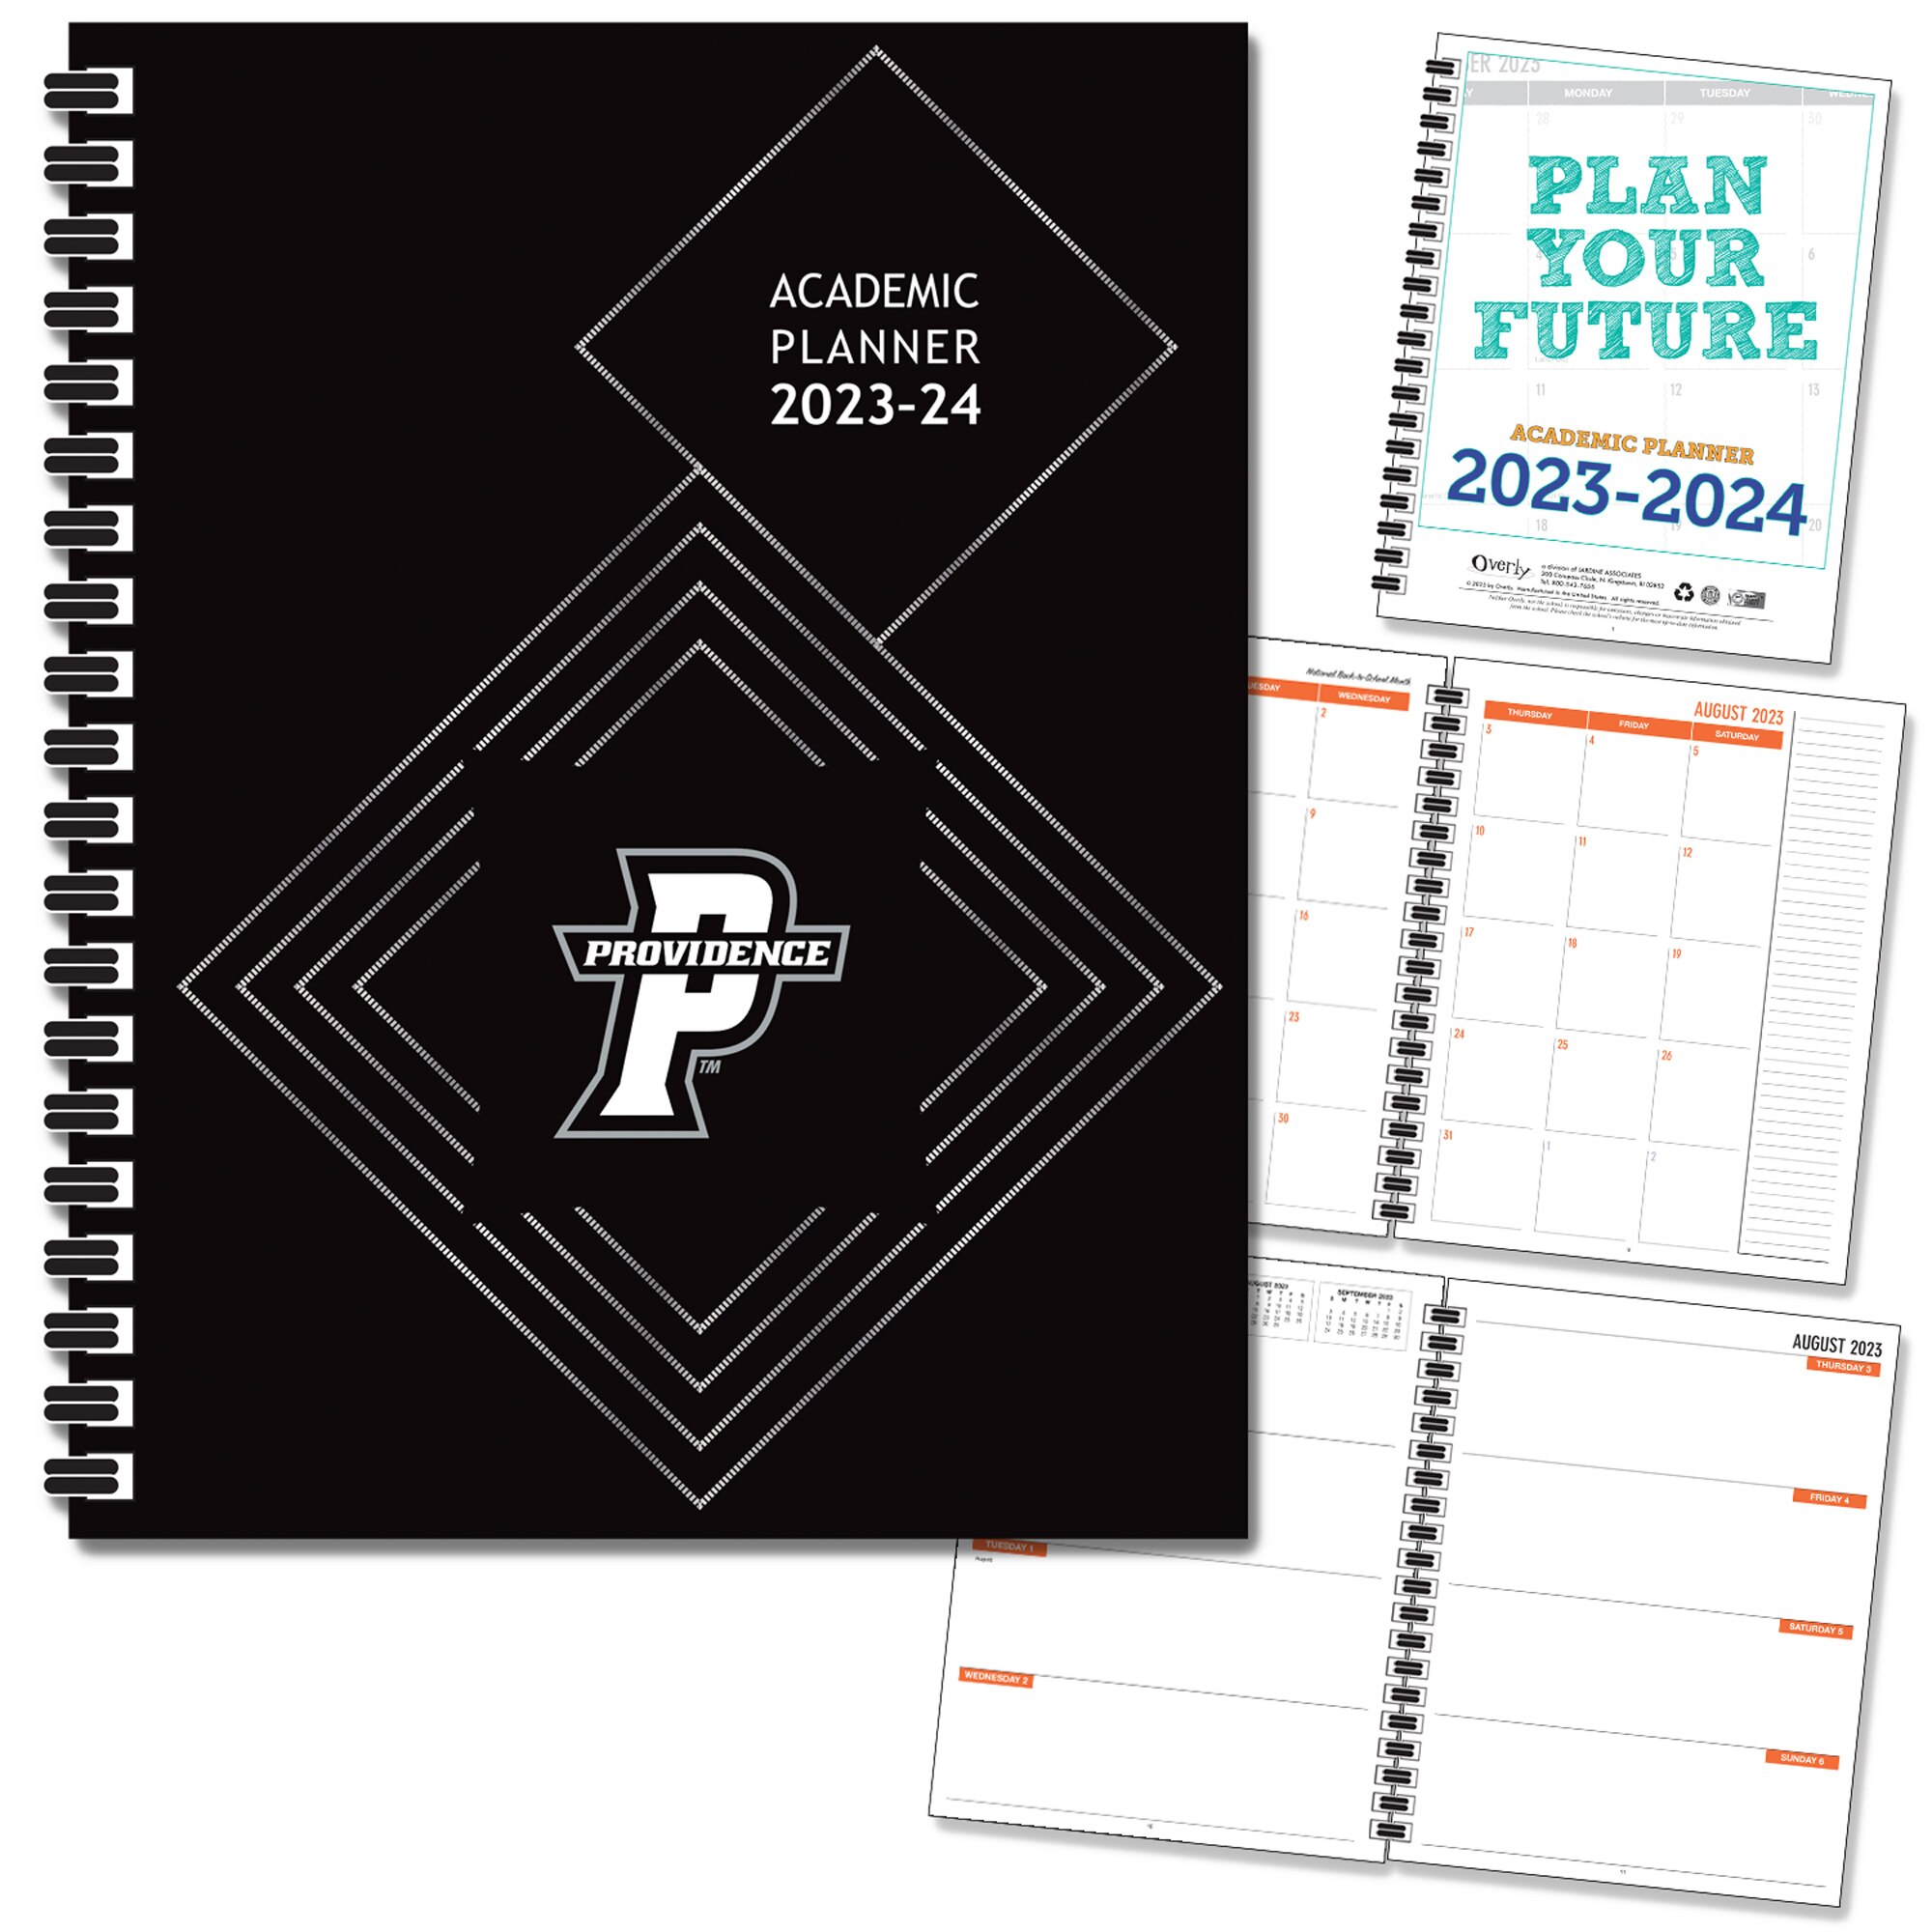 FY 24 Traditional Soft Touch Foil - Wordmark Imprinted Planner 23-24 AY 7x9